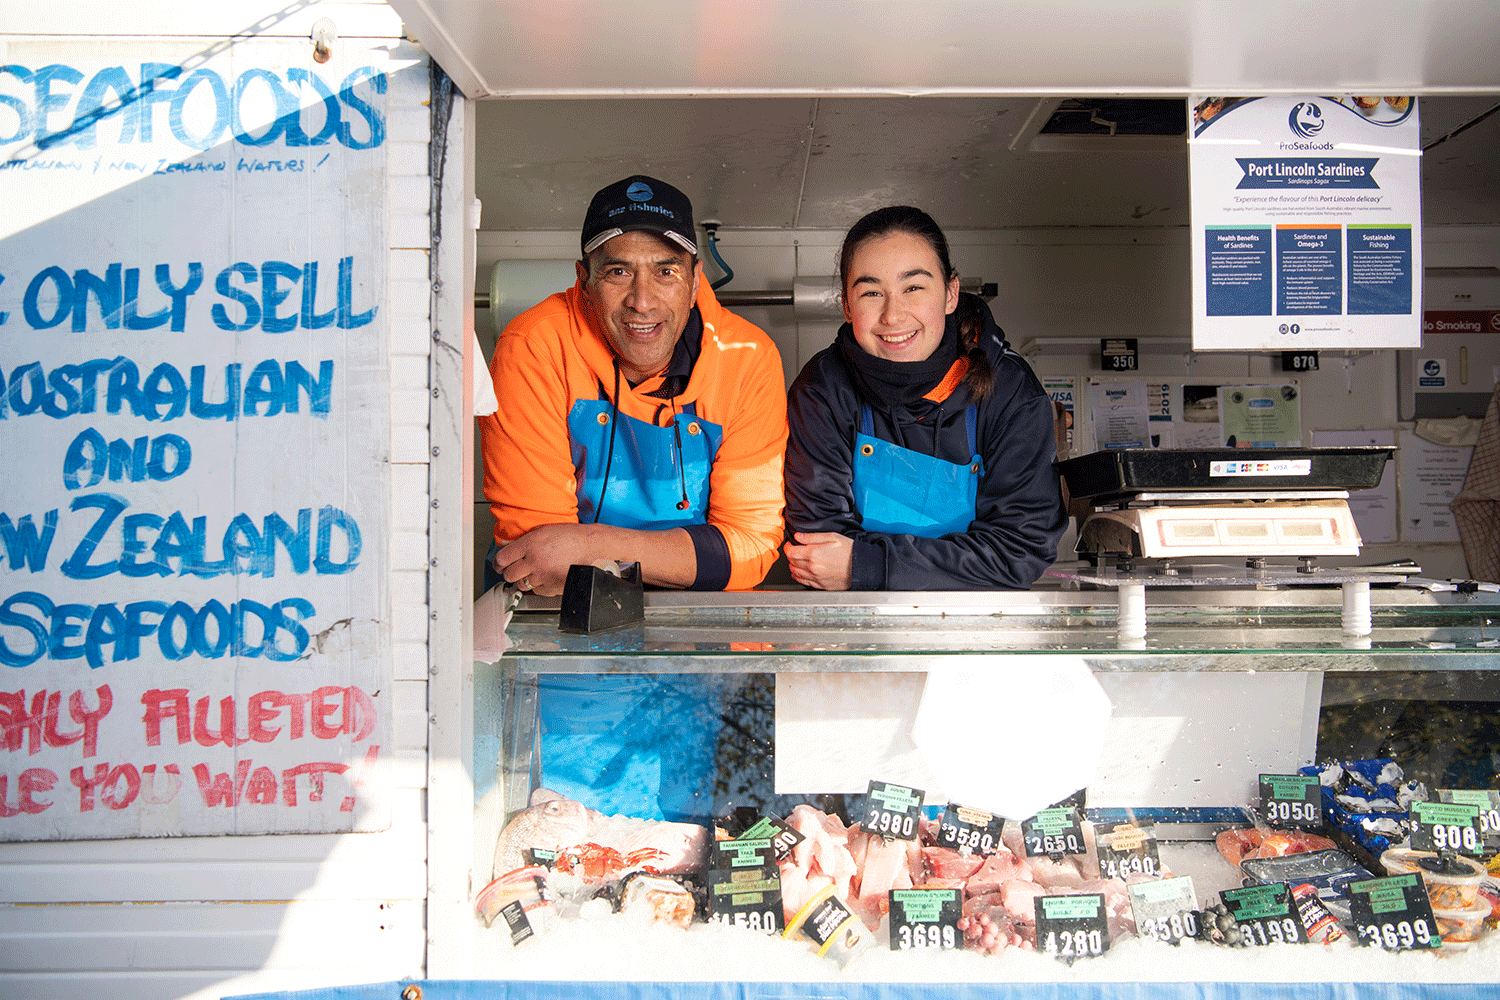 A man and a woman smiling in a mobile store with seafood for sale